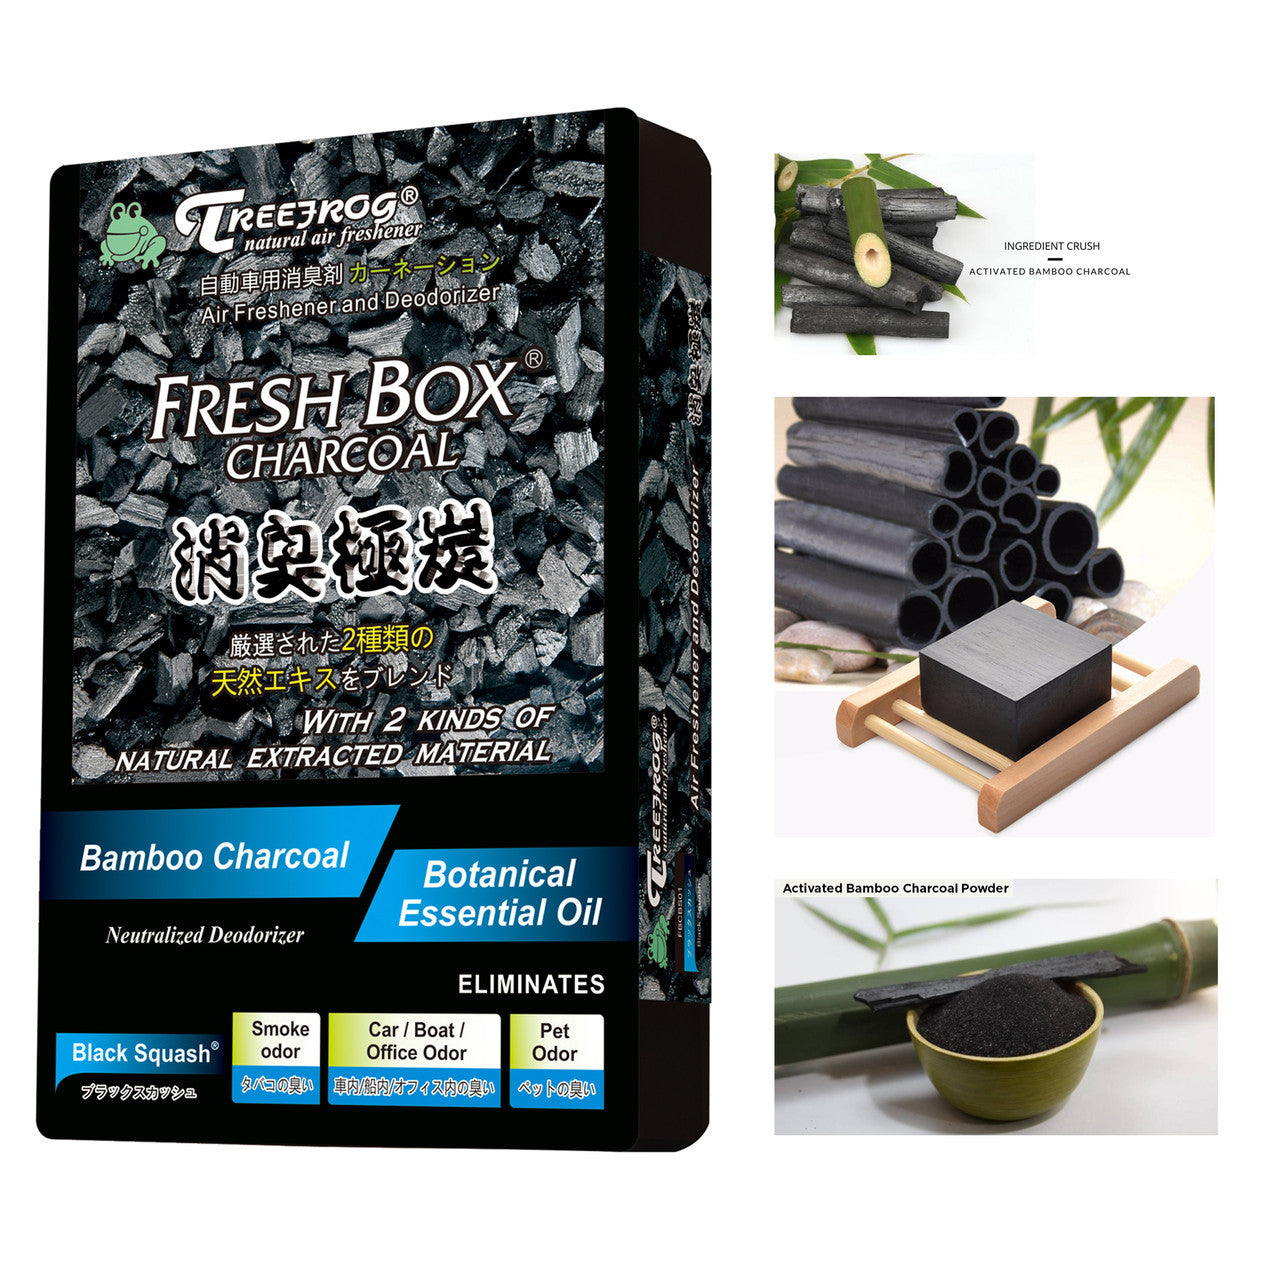 Treefrog Air Freshener, Bamboo Charcoal, Black Squash Scent 6-Pack, Captures, Eliminates Odors, Purifies and Freshens Air